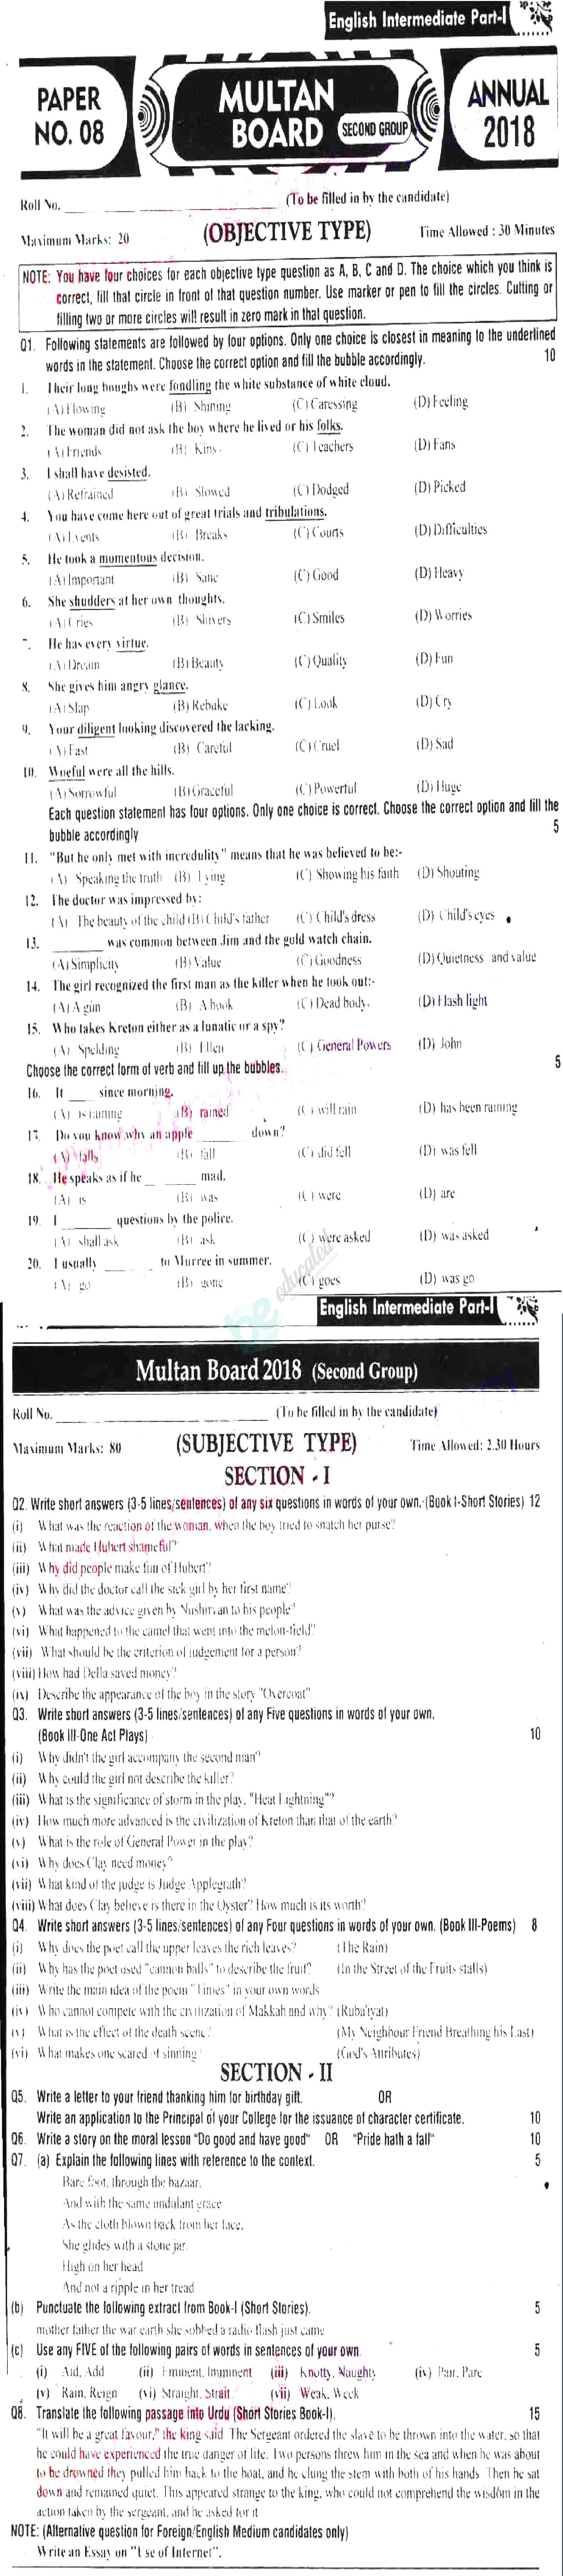 English 11th class Past Paper Group 2 BISE Multan 2018